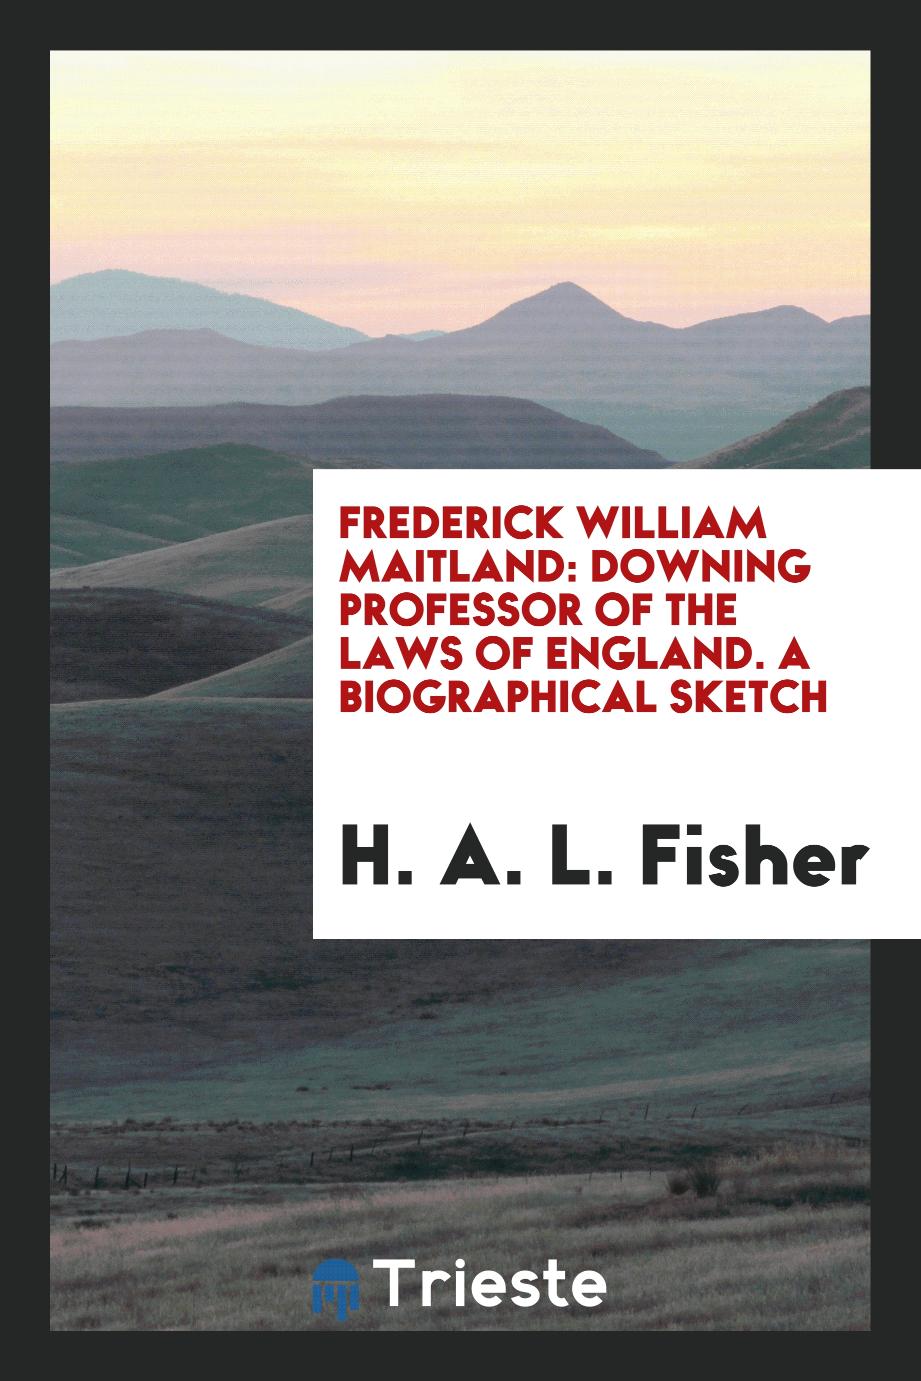 Frederick William Maitland: Downing professor of the laws of England. A biographical sketch